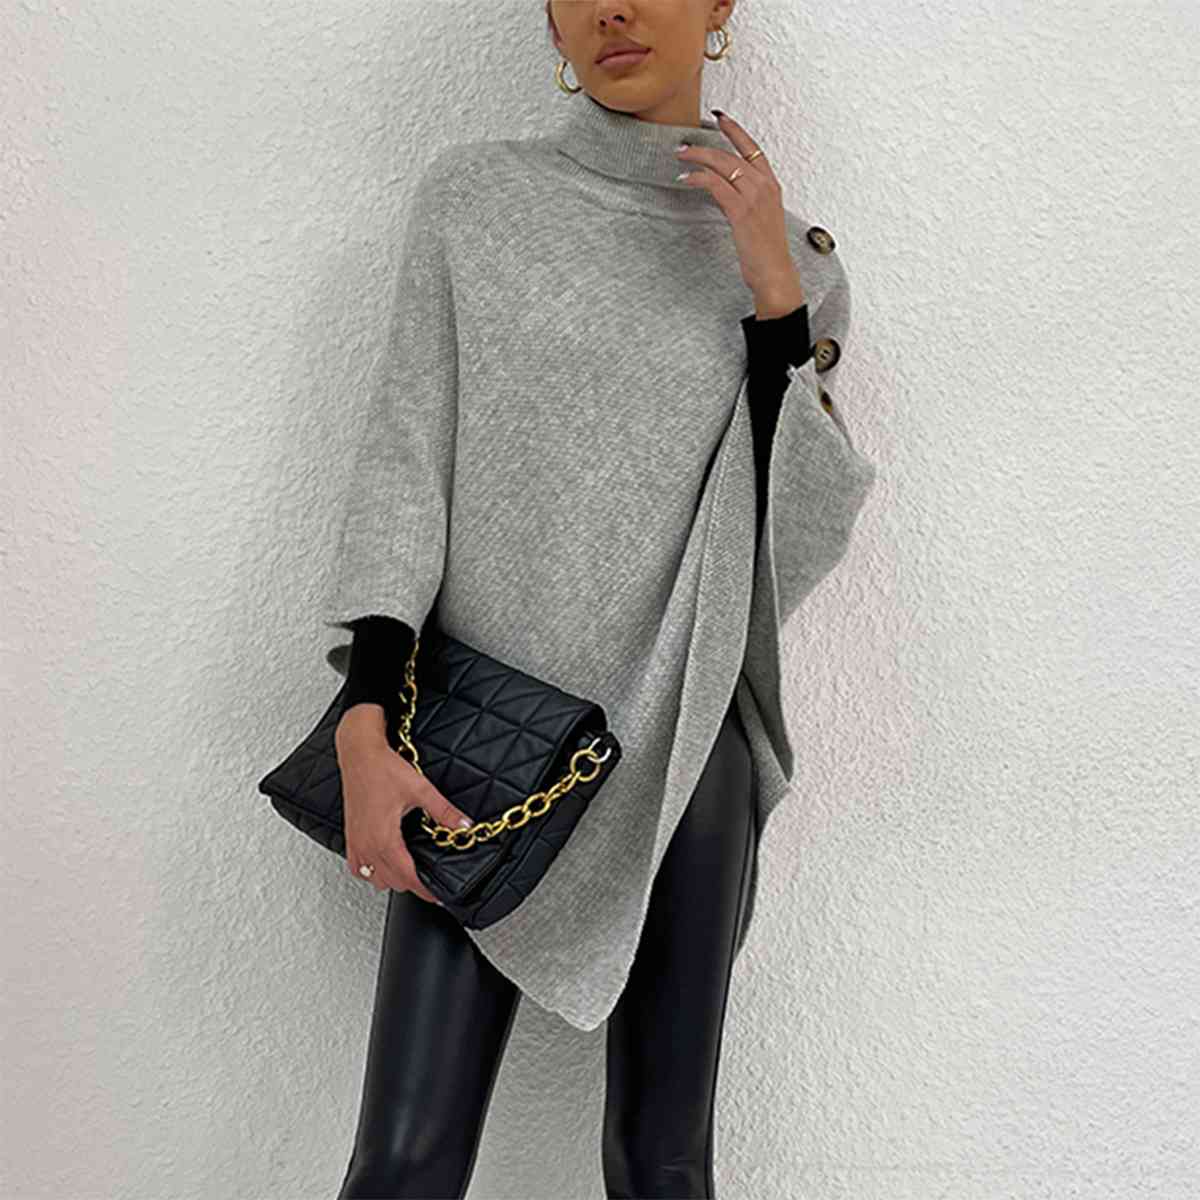 Turtleneck Buttoned Poncho - Fashion Girl Online Store